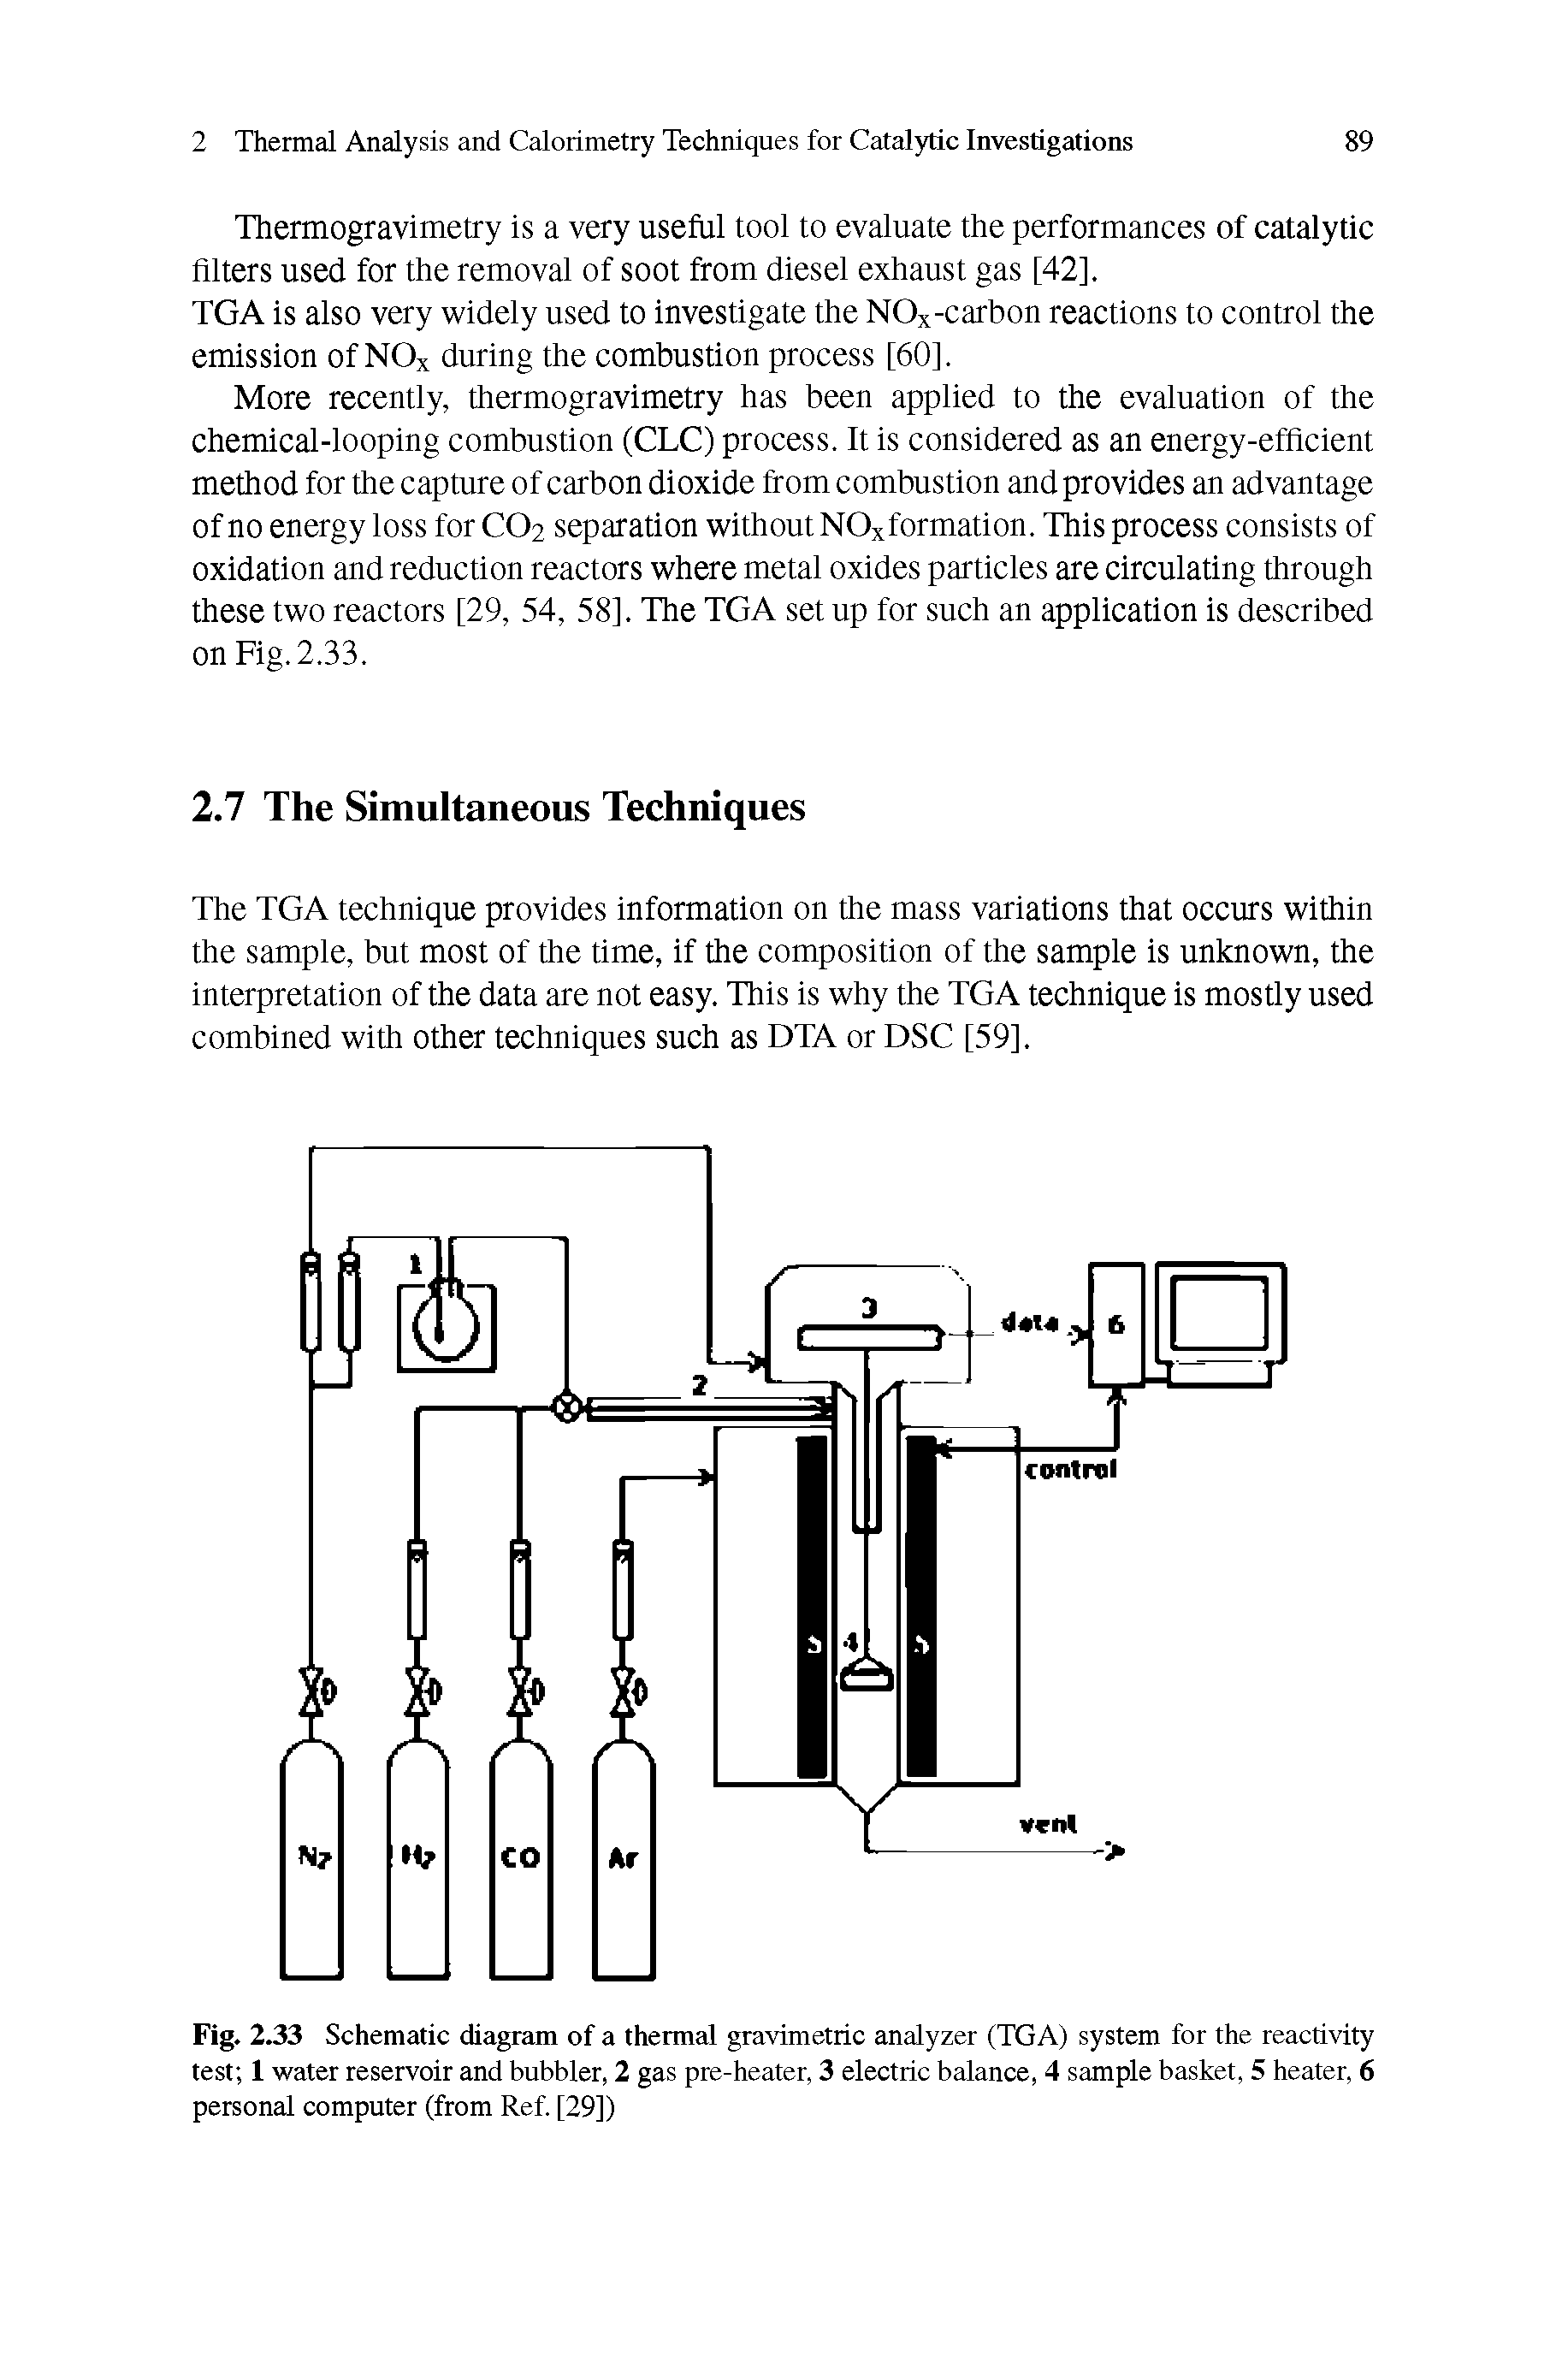 Fig. IJS Schematic diagram of a thermal gravimetric analyzer (TGA) system for the reactivity test 1 water reservoir and bubbler, 2 gas pre-heater, 3 electric balance, 4 sample basket, 5 heater, 6 personal computer (from Ref. [29])...